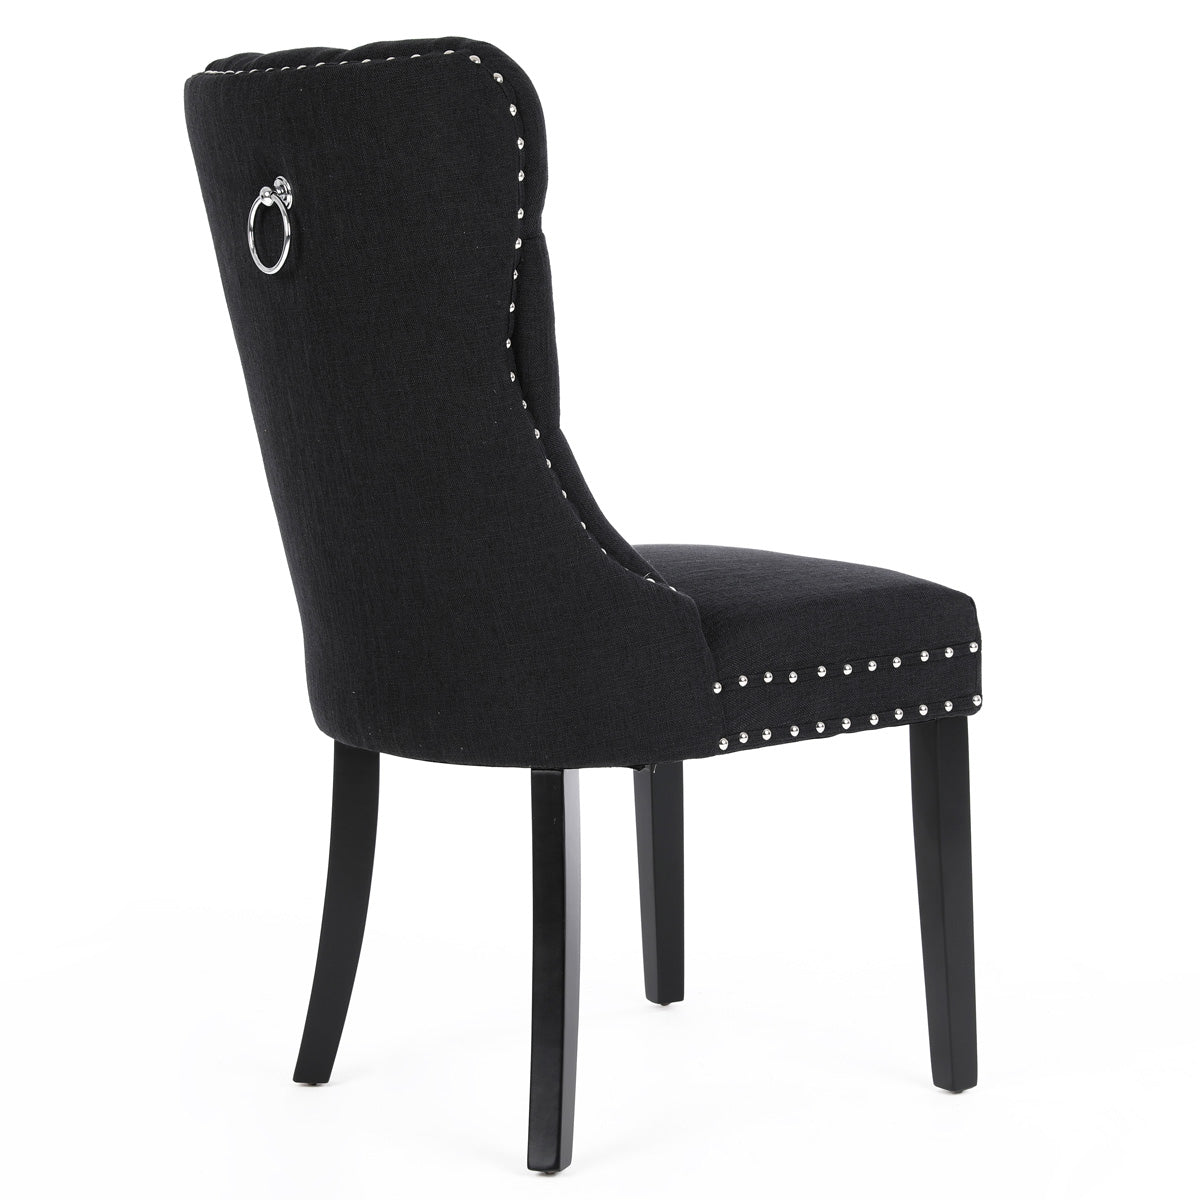 Chanel Scoop Back Dining Chairs with Ring Handle (Set of 2, Black Fabric / Black Legs)